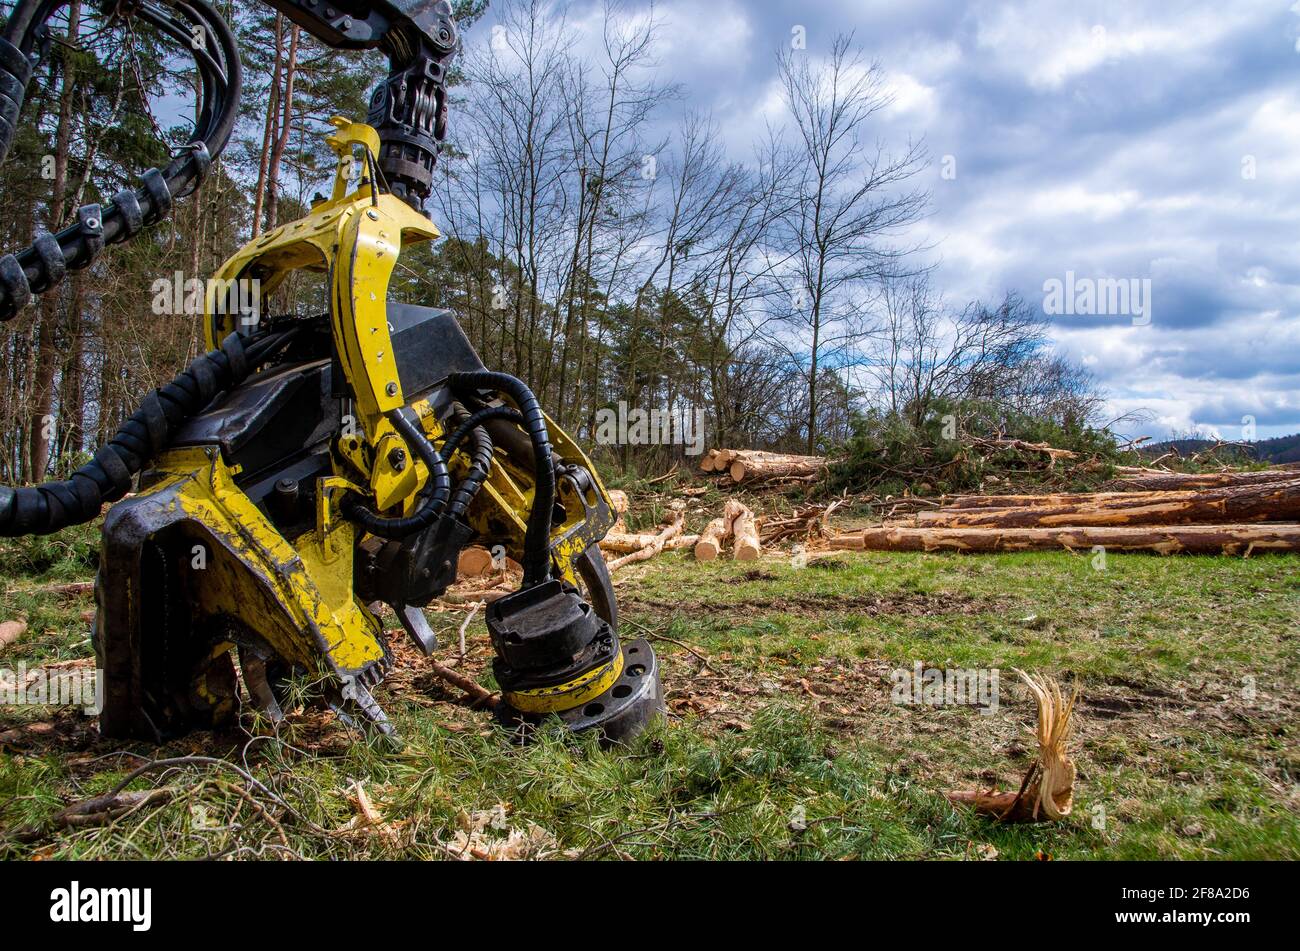 Harvester with logs, forest and cloudy spring sky in the background Stock Photo